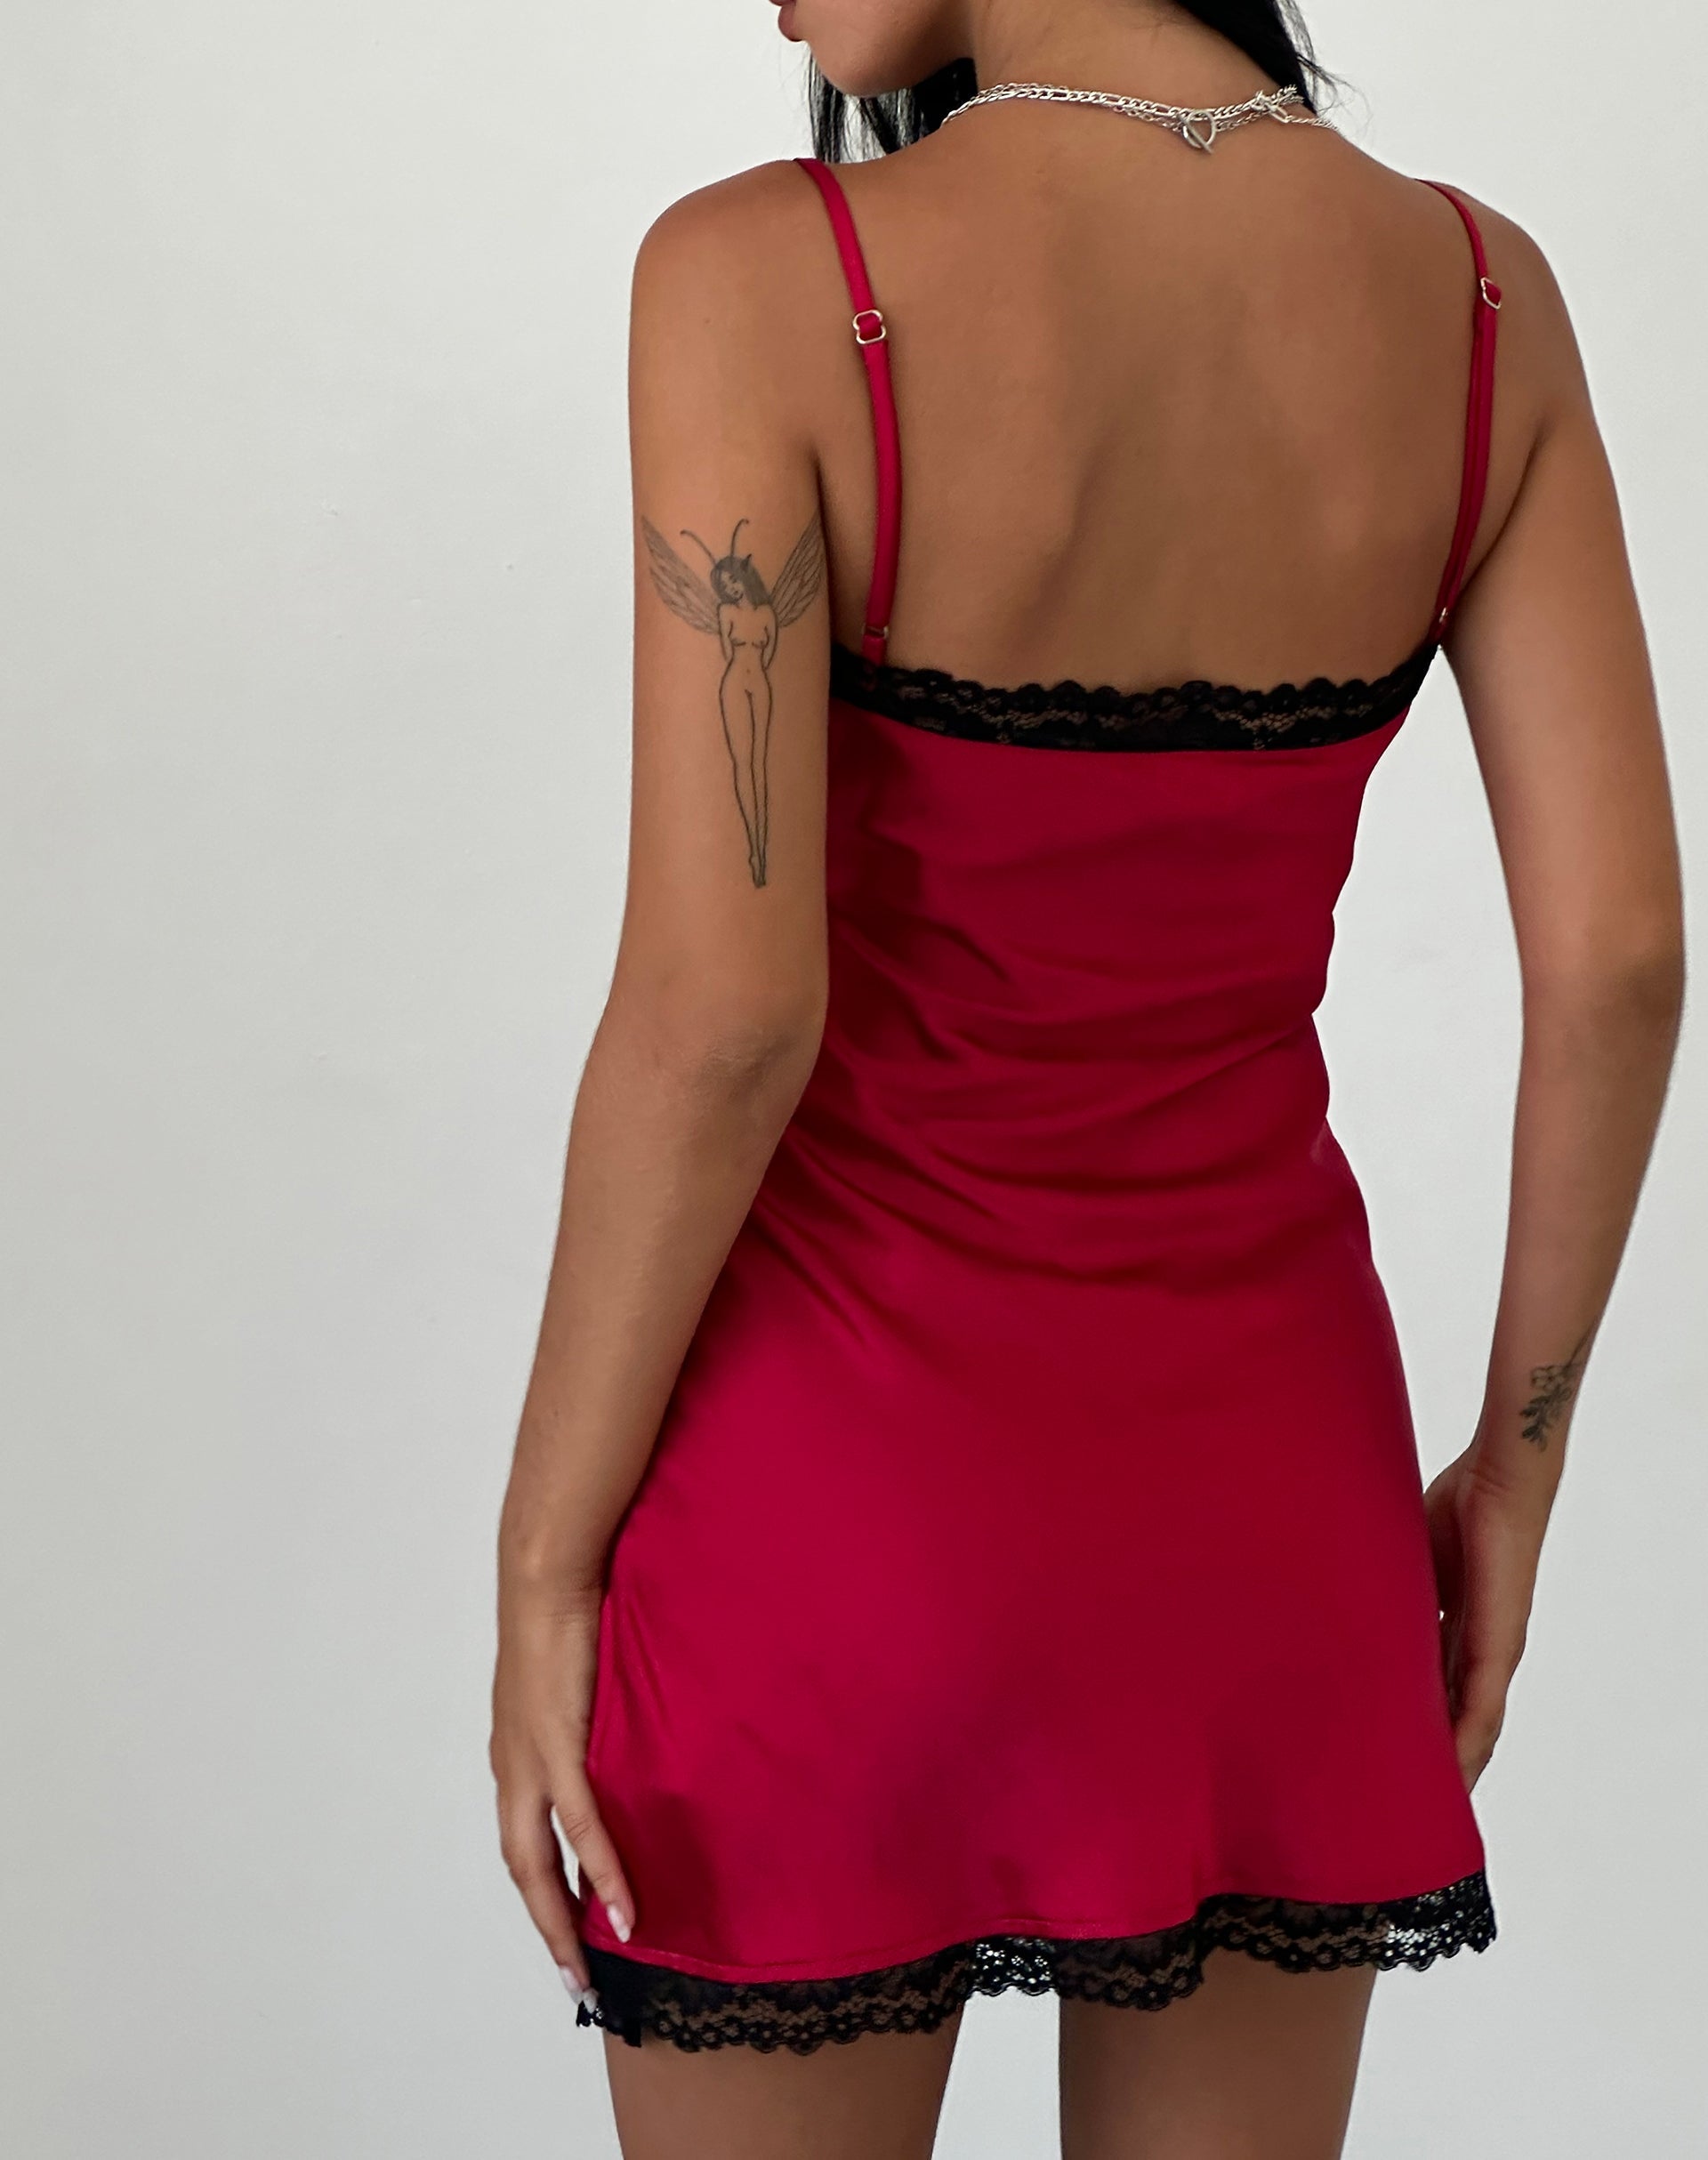 Image of Larna Satin Mini Dress in Red with Black Lace Trimming